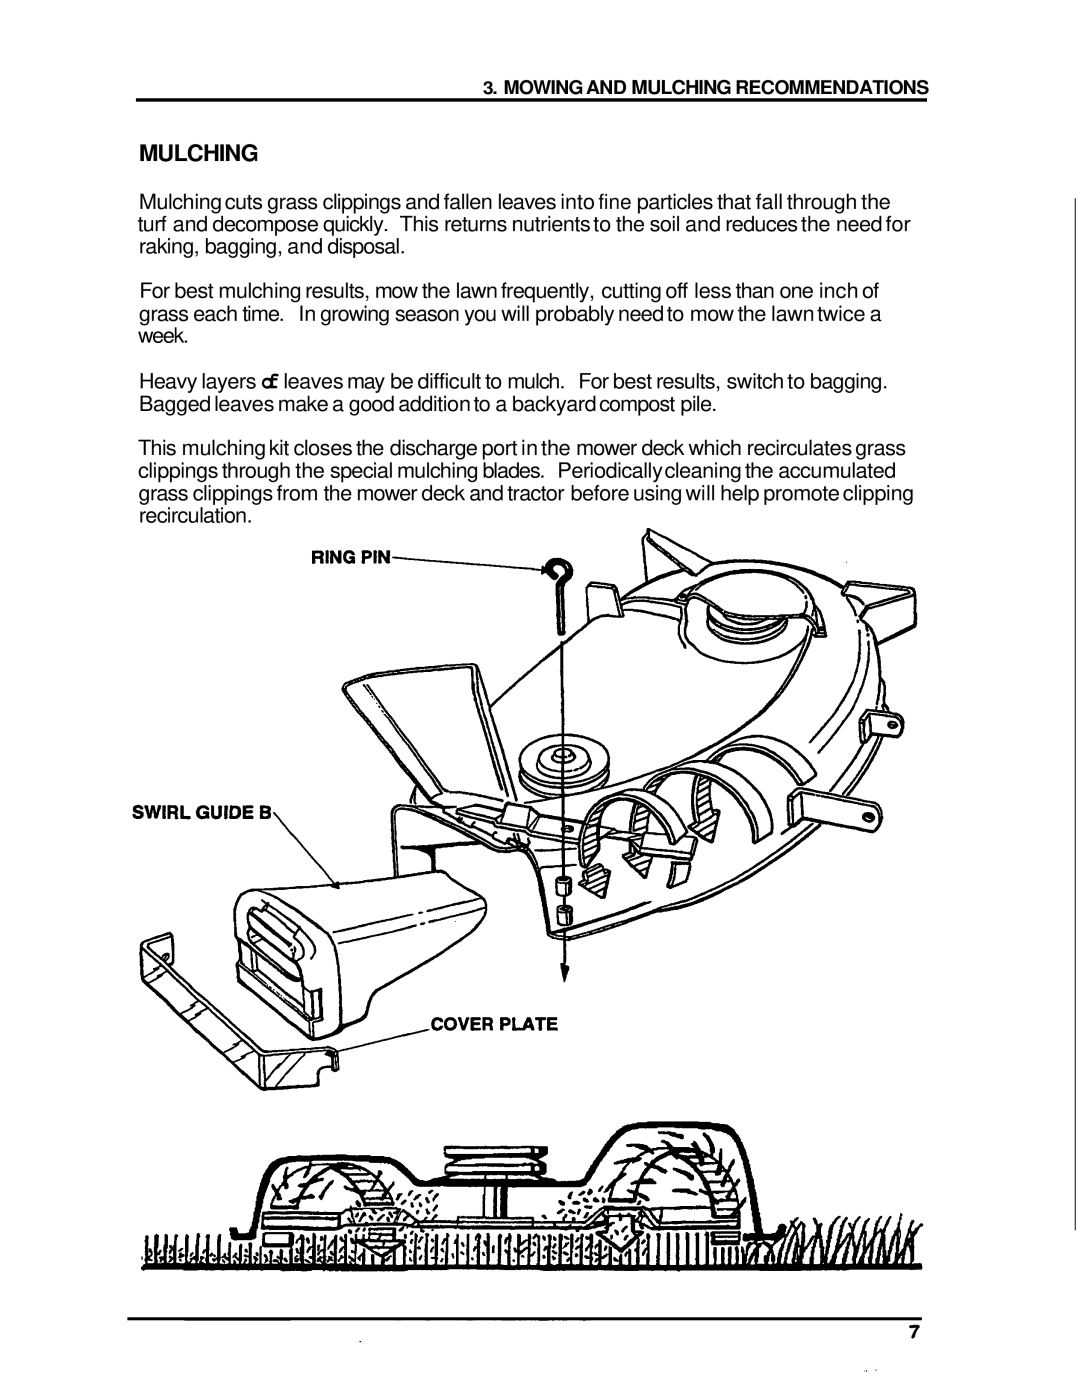 Honda Power Equipment H2000 manual Mowing And Mulching Recommendations 